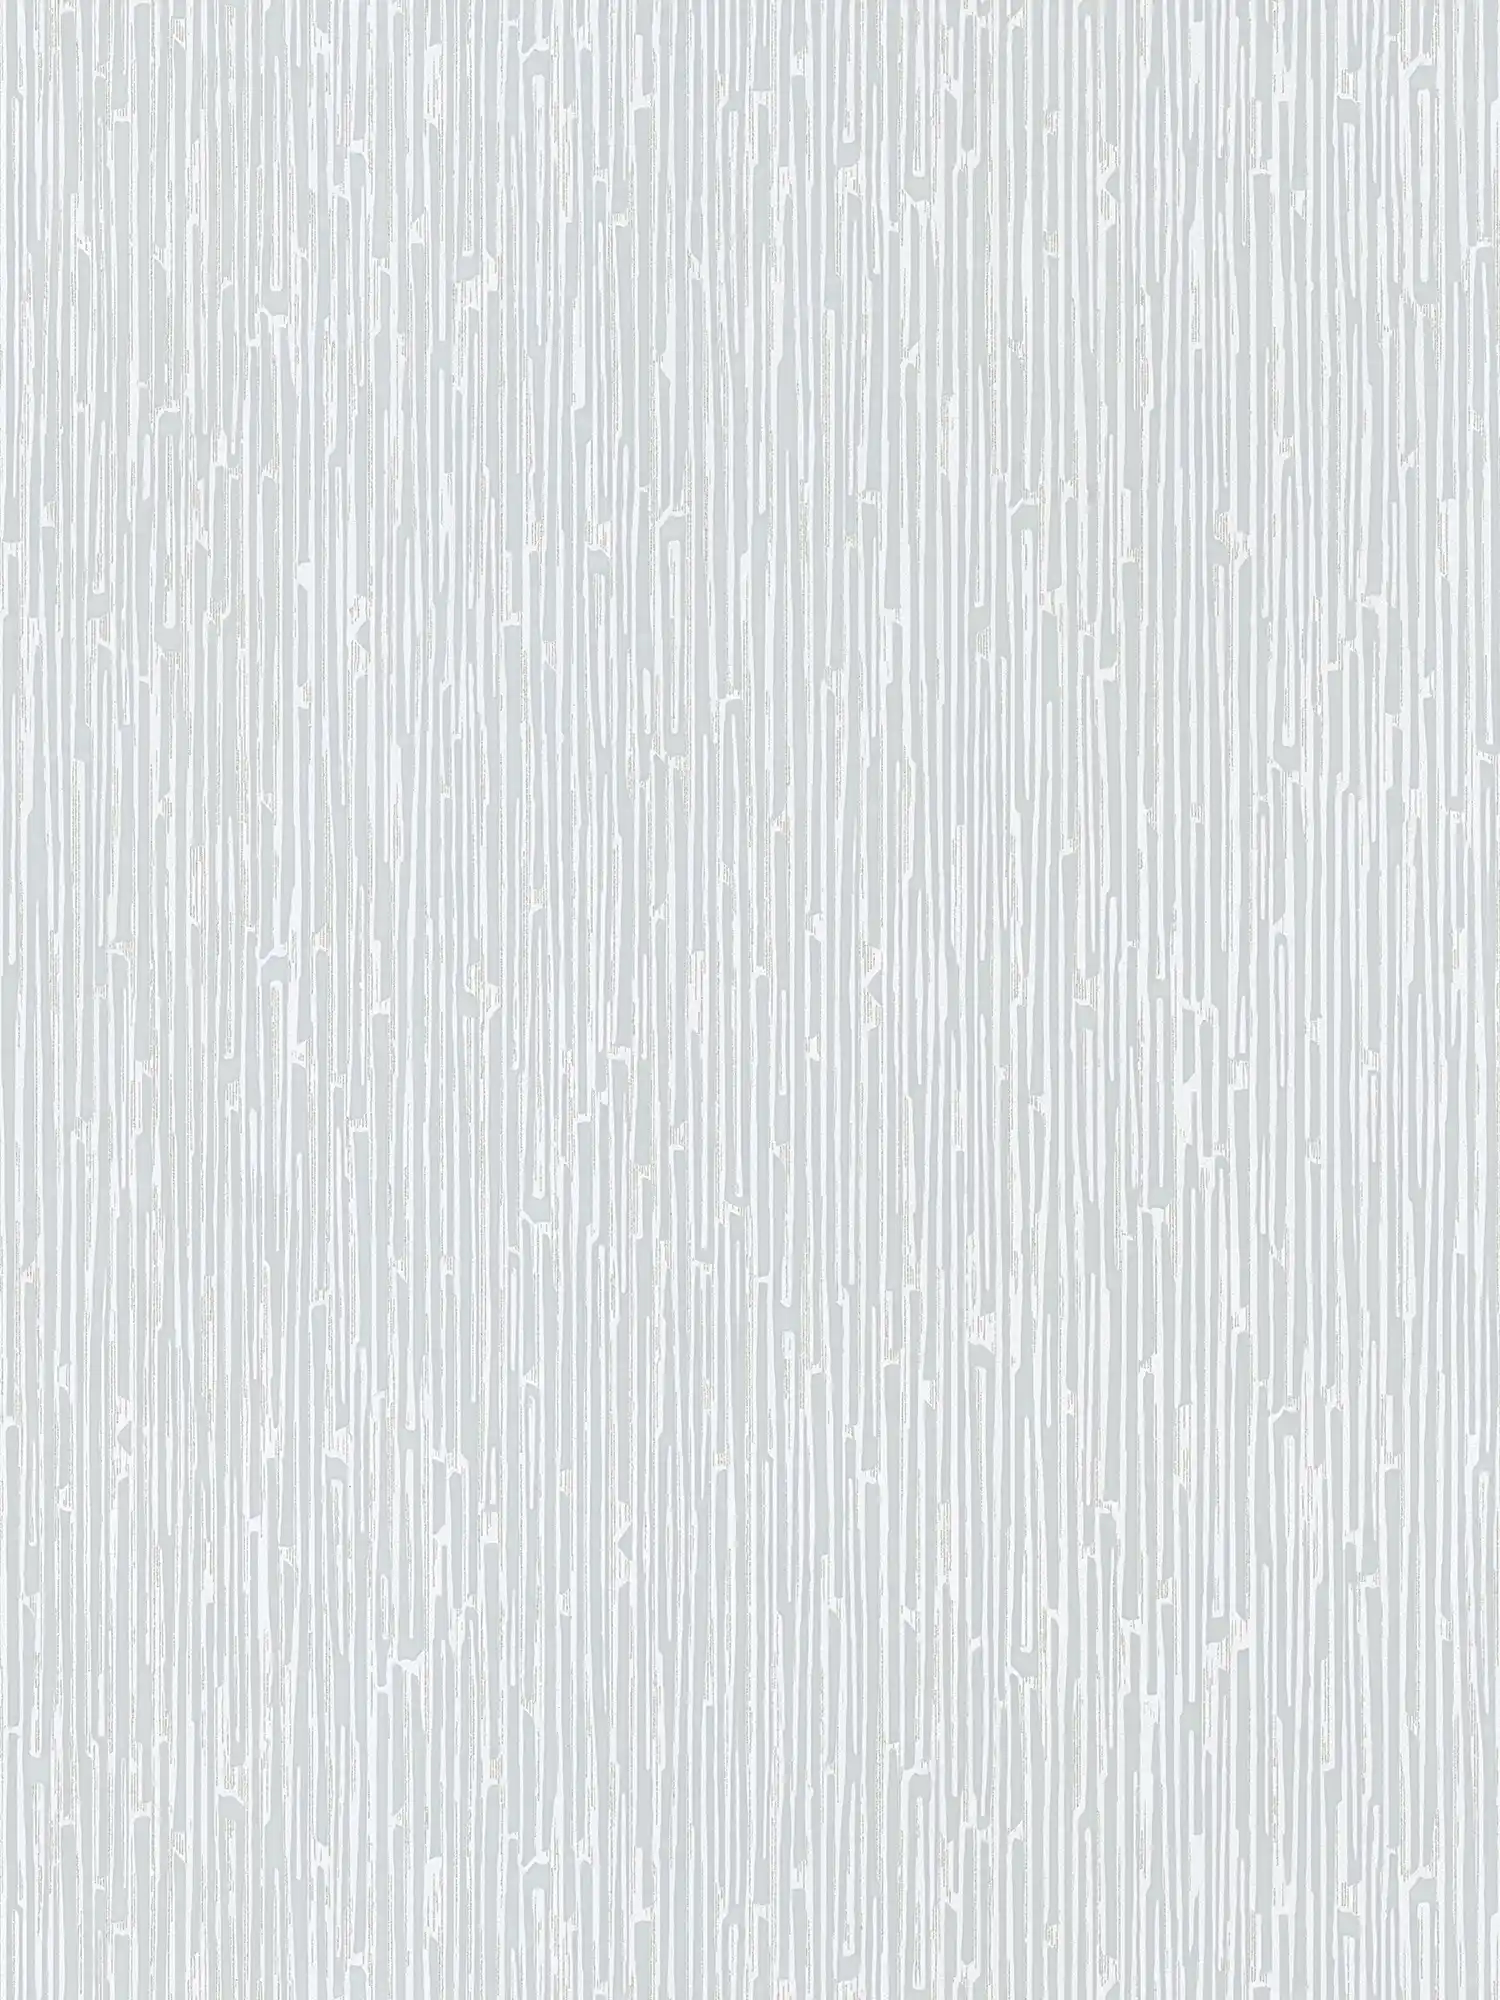 Pattern wallpaper grey with embossed texture & abstract pattern
